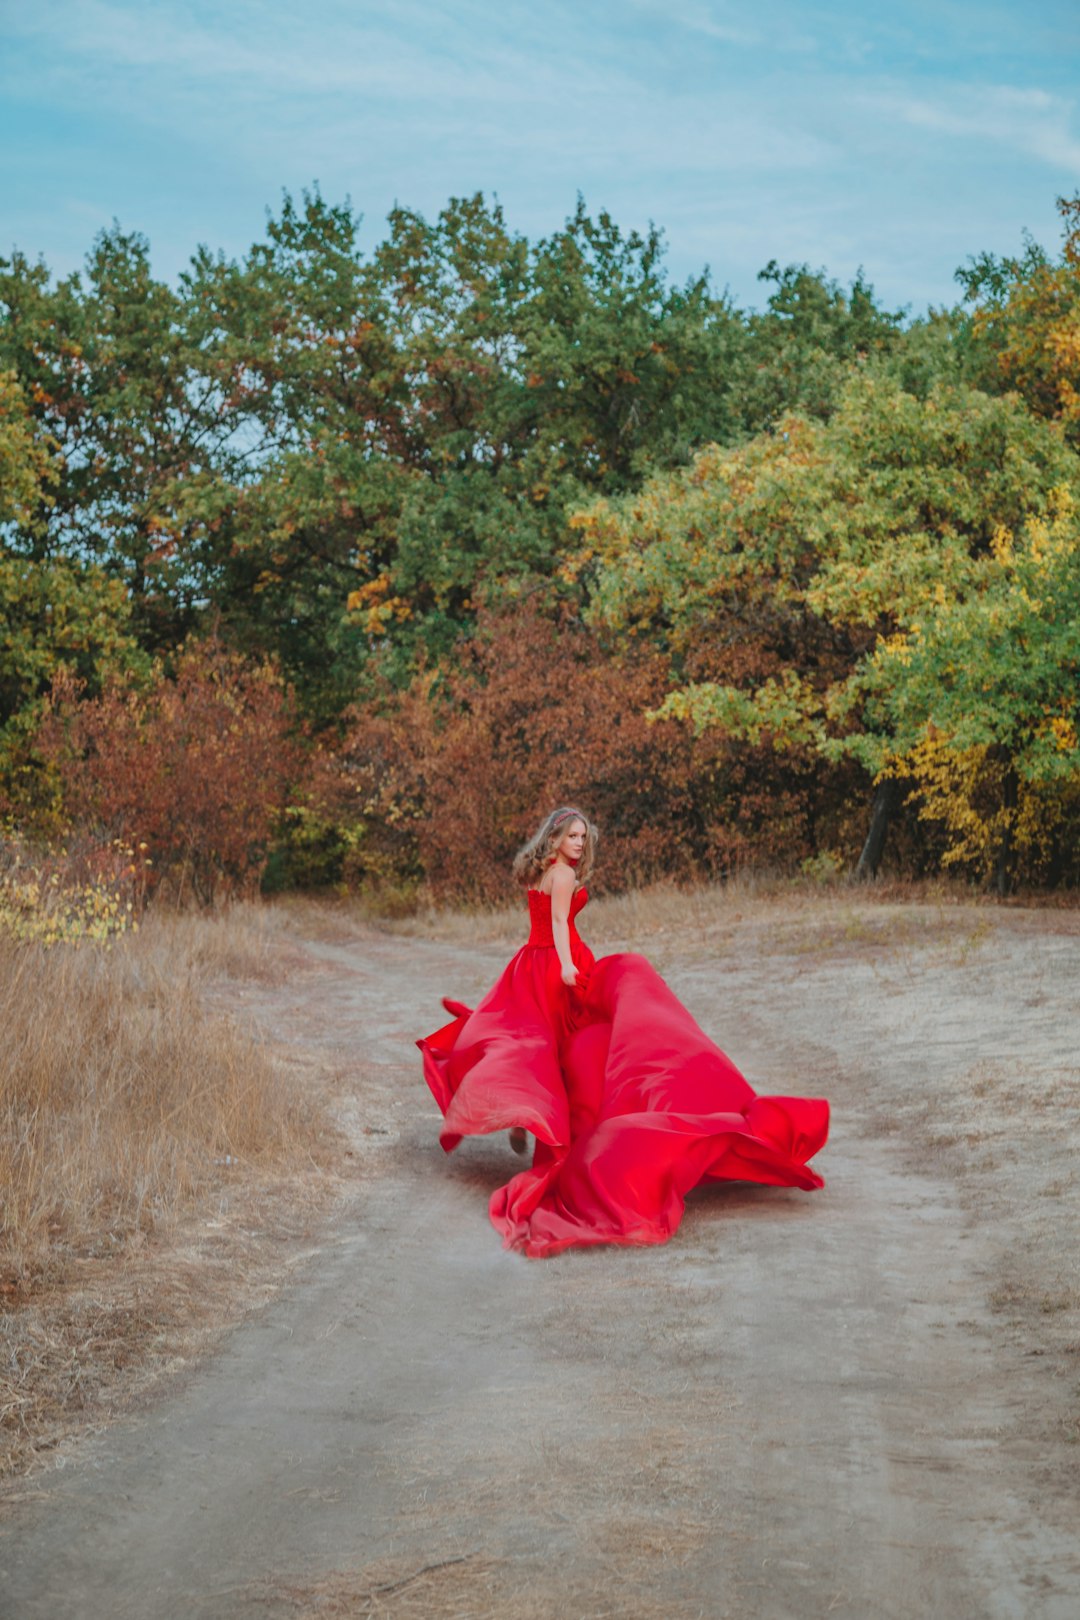 woman in red dress sitting on dirt road during daytime